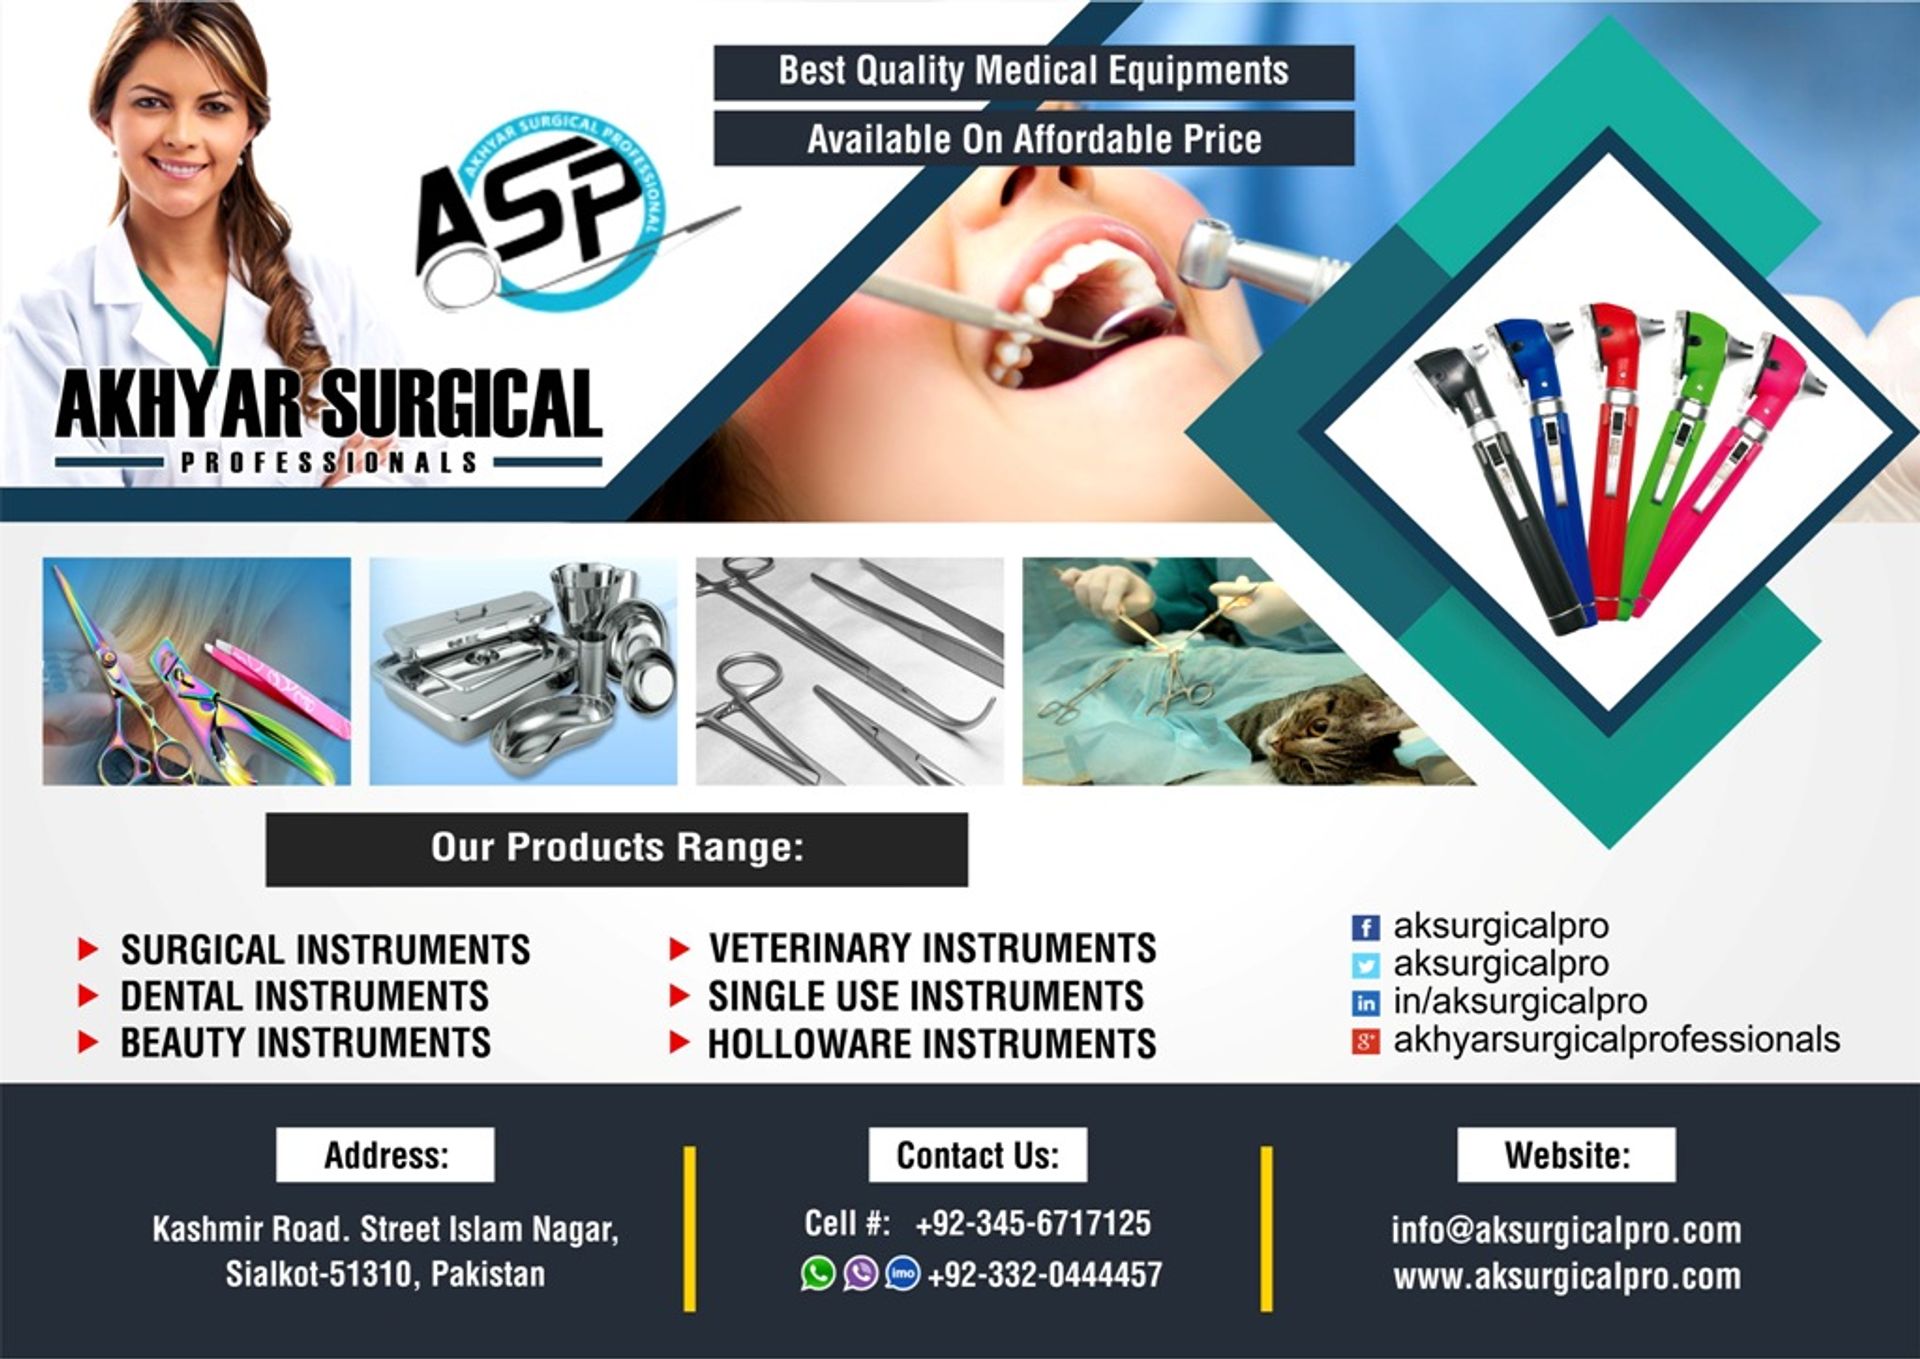 Akhyar Surgical Professionals